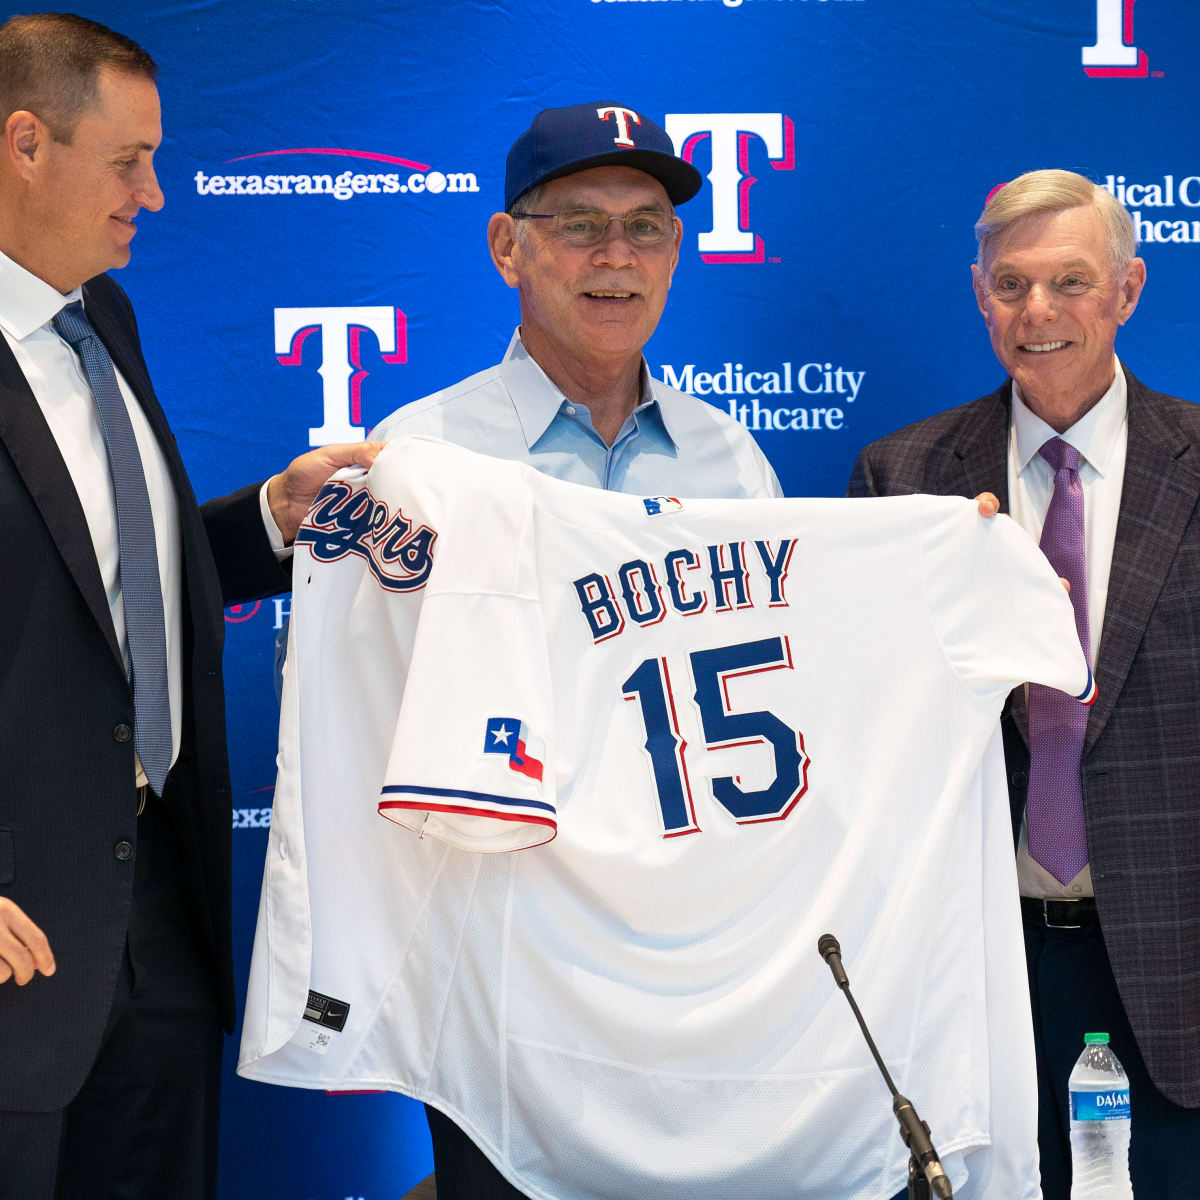 Bruce Bochy as New Manager For Texas Rangers – NBC 5 Dallas-Fort Worth